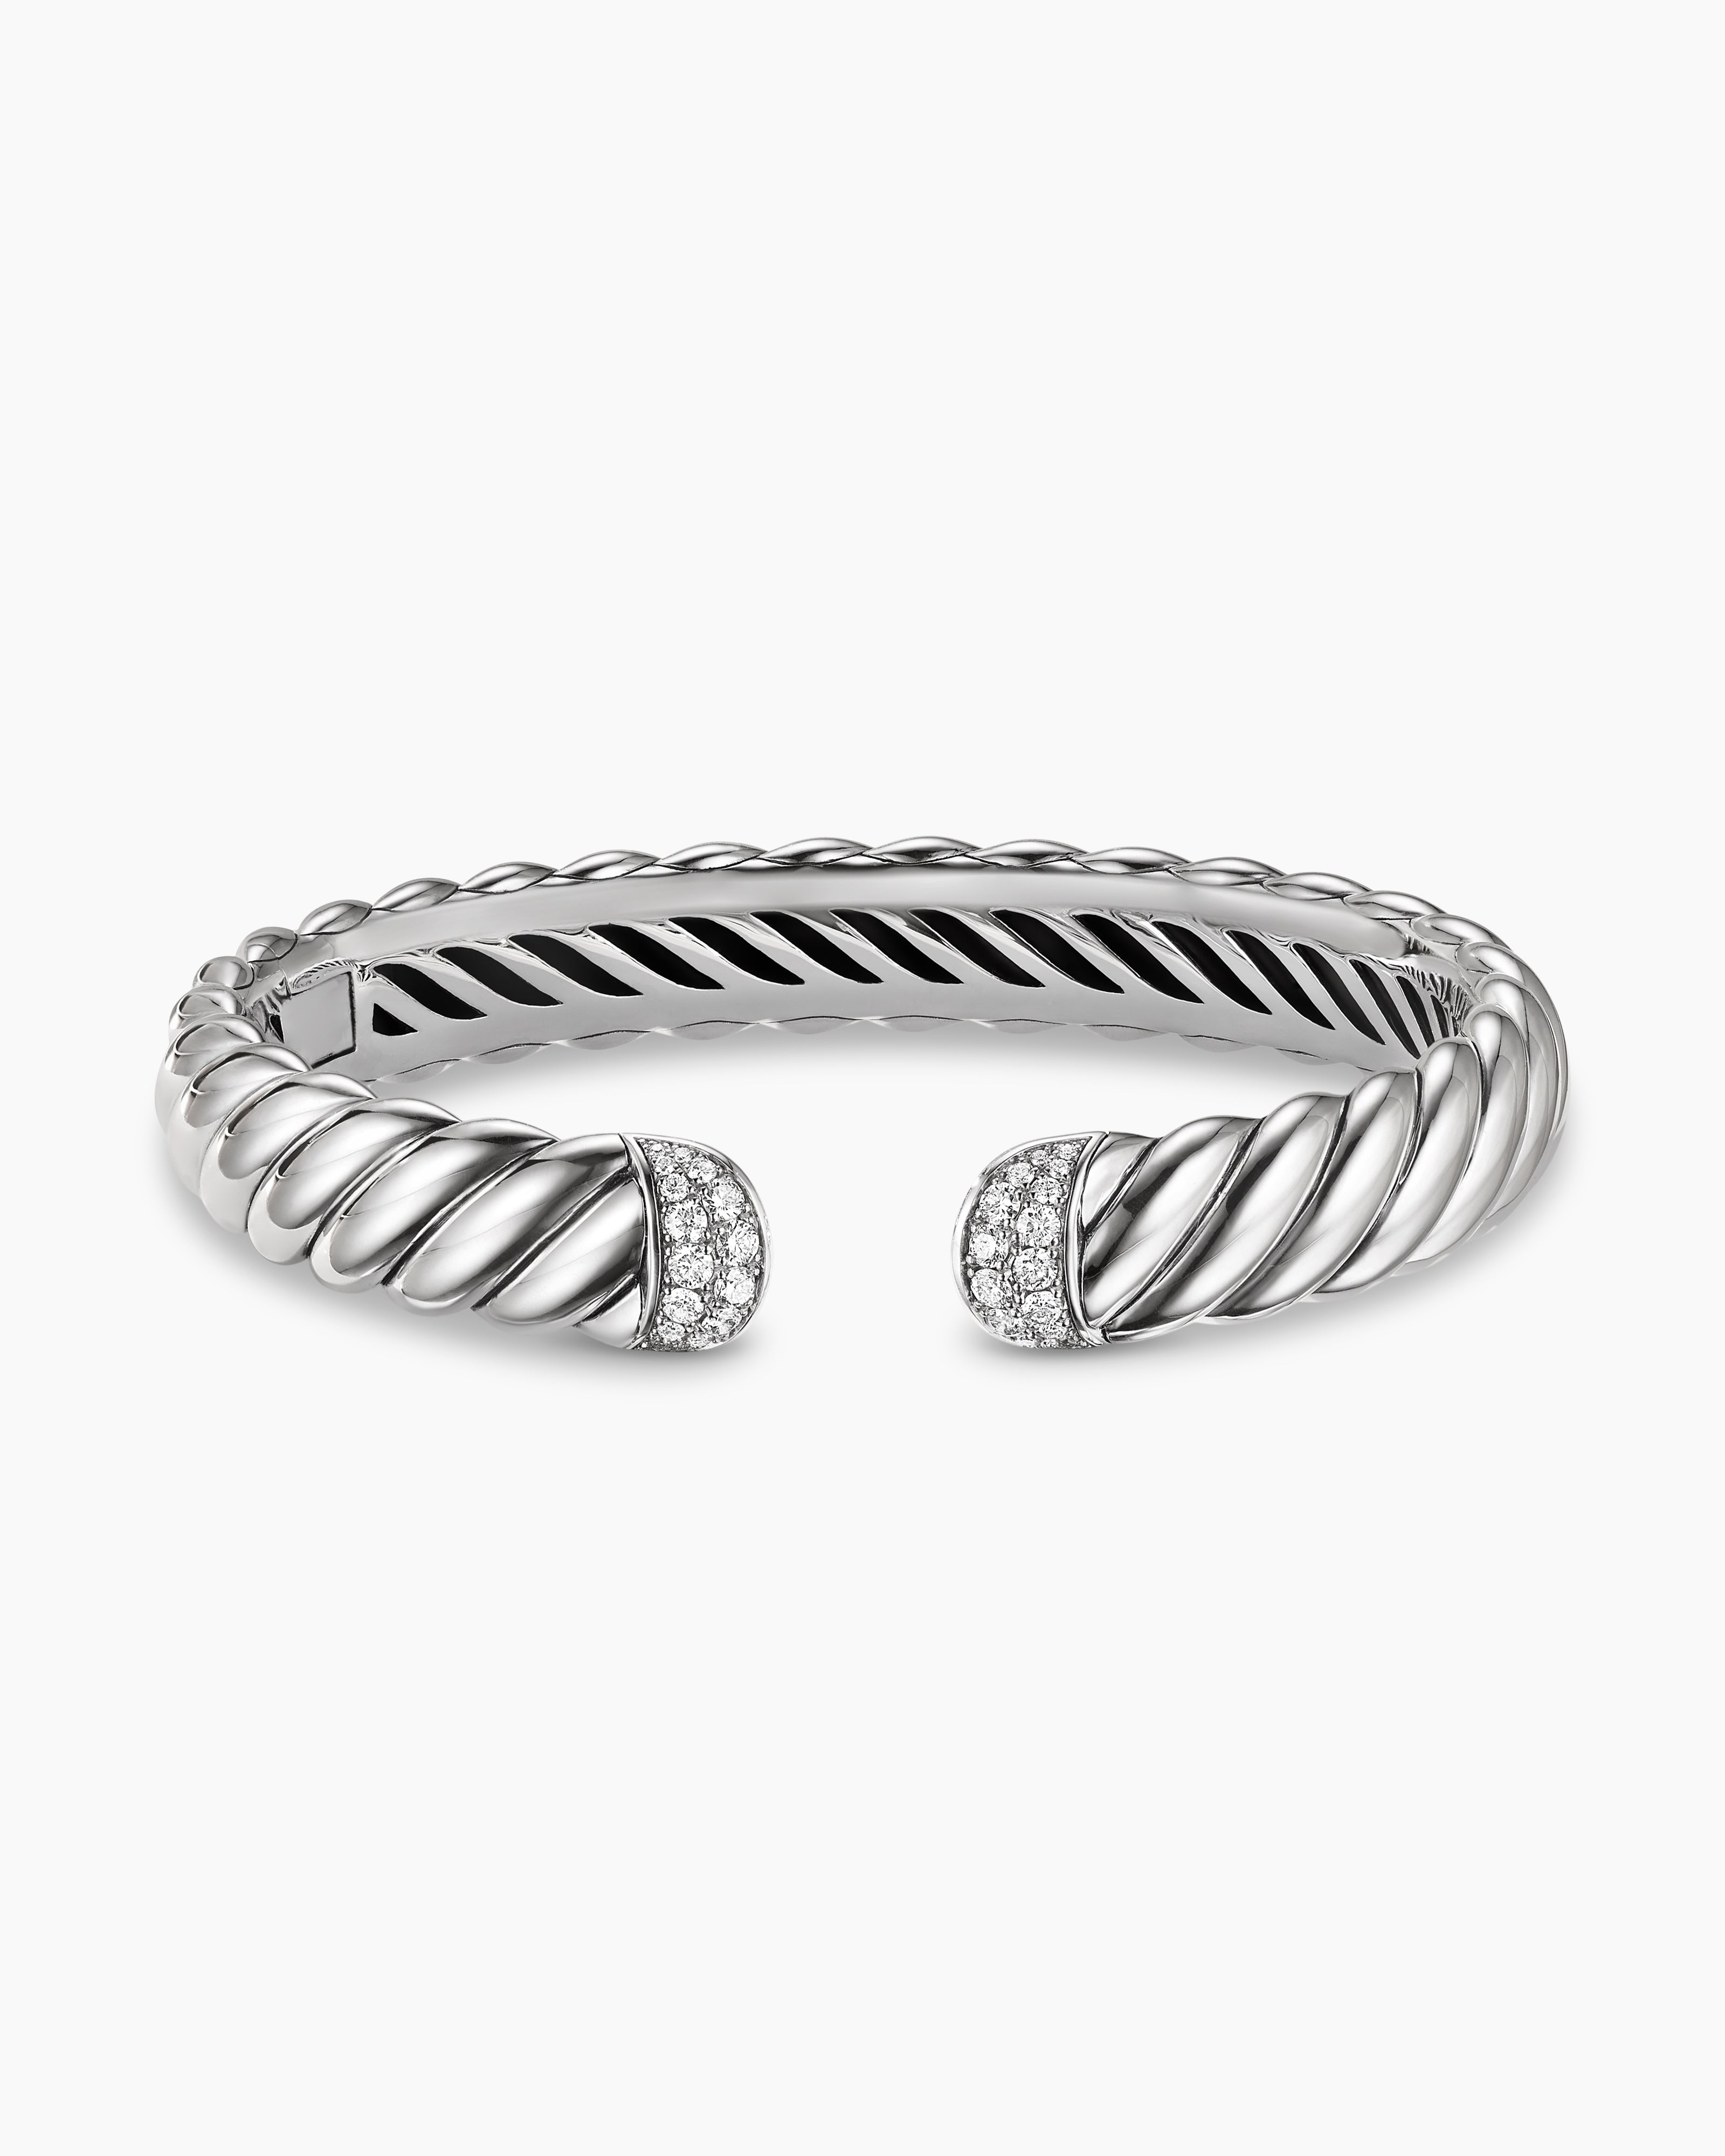 David Yurman 10mm Cable Buckle Bangle Bracelet DY 925 Sterling Silver 750  18k Gold Free US Shipping